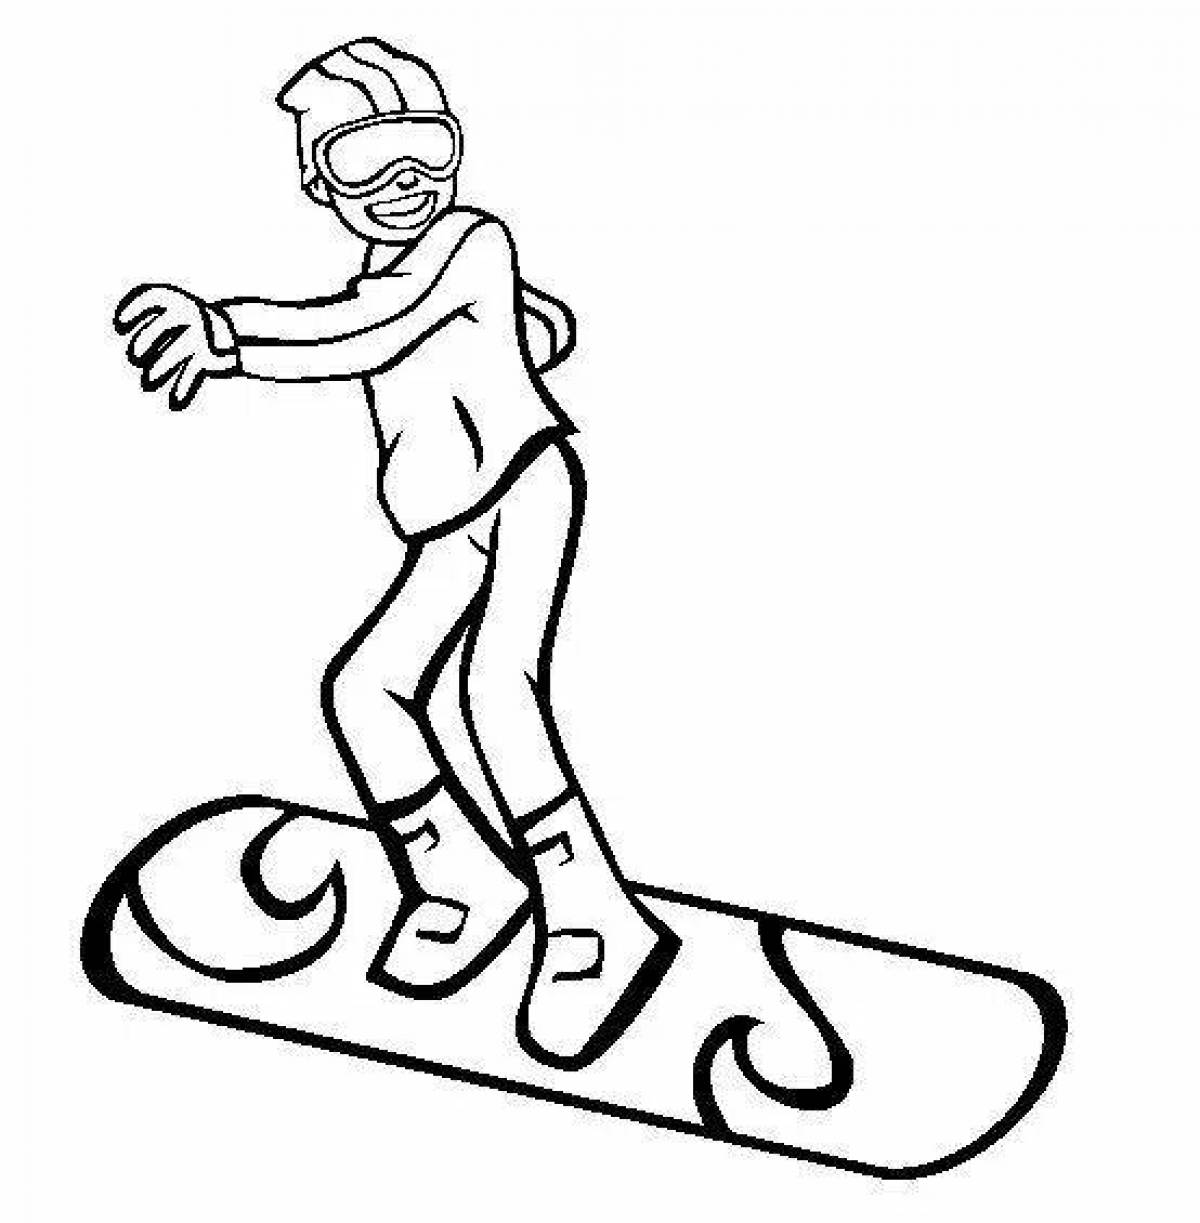 Outstanding snowboard coloring page